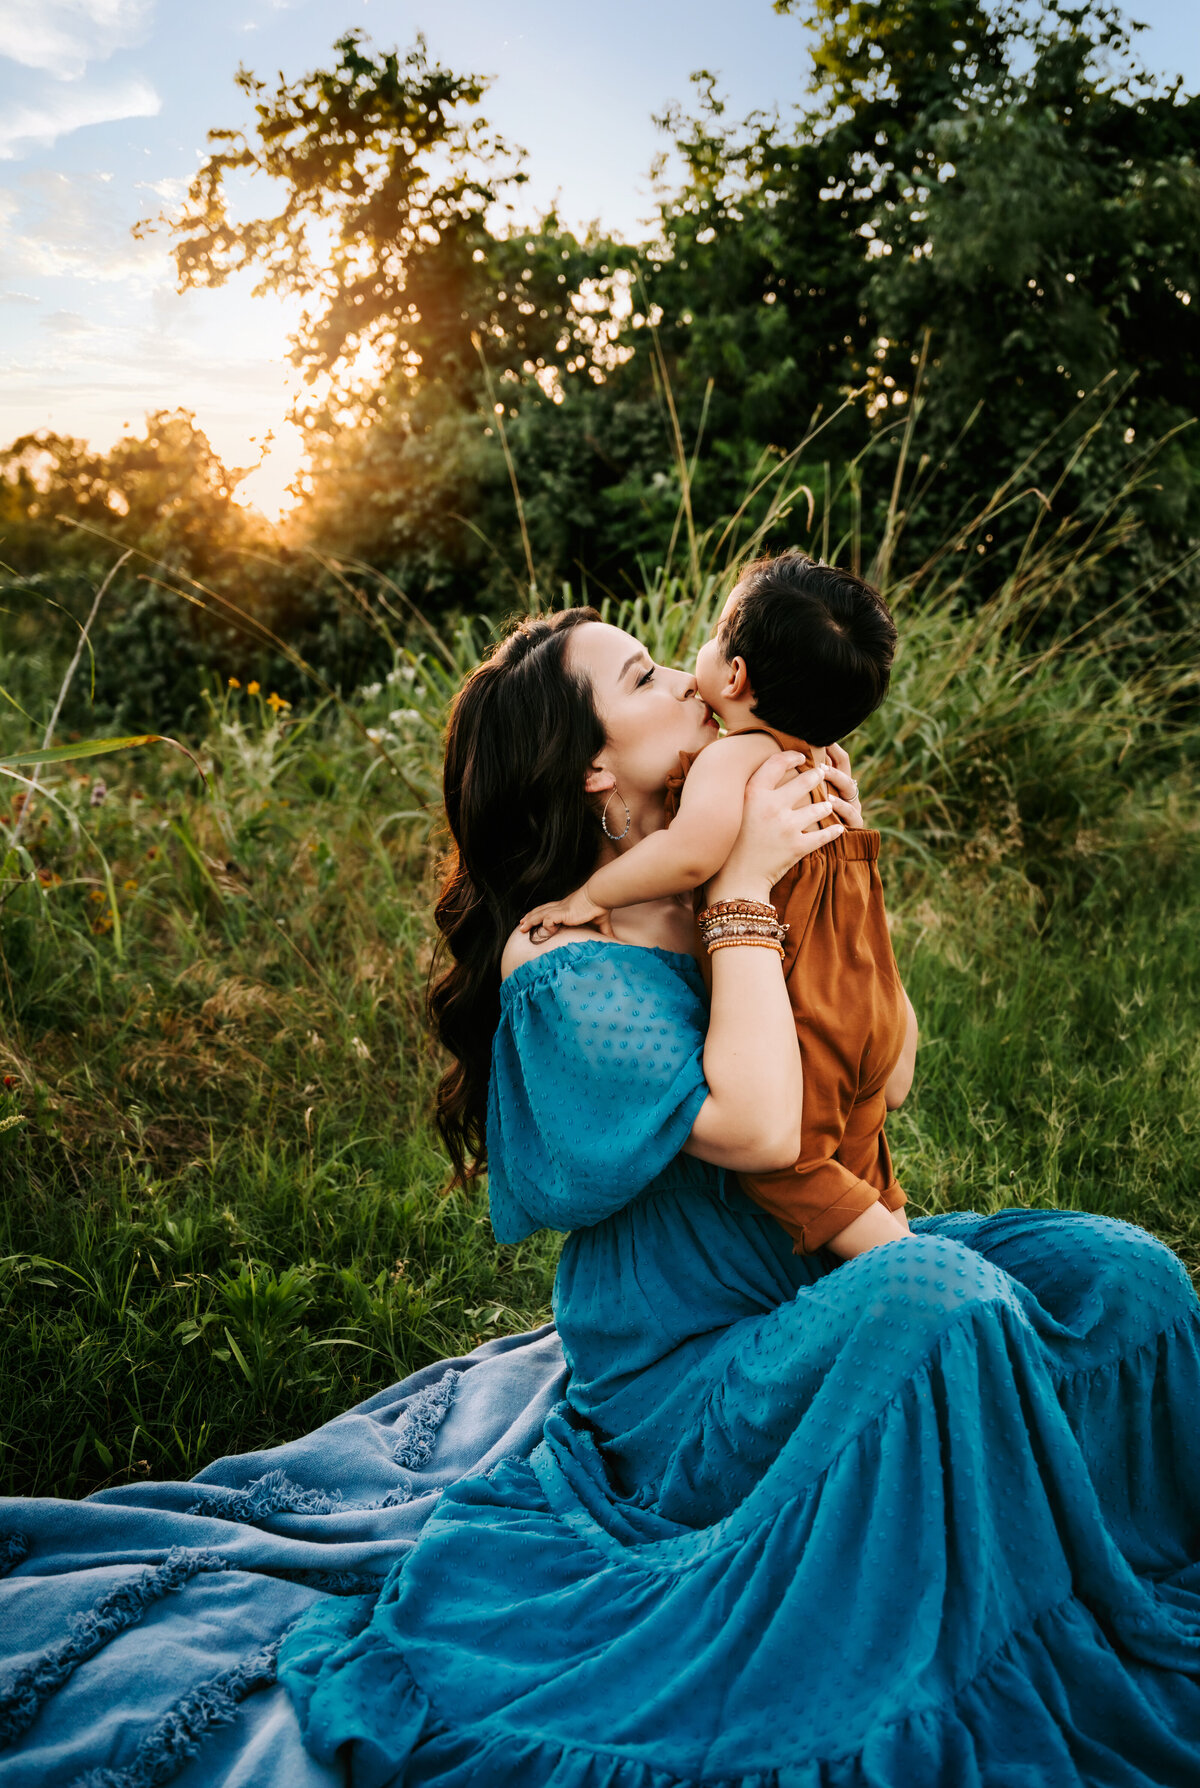 Family Photographer, a mother kisses her baby in a lush grassy landscape